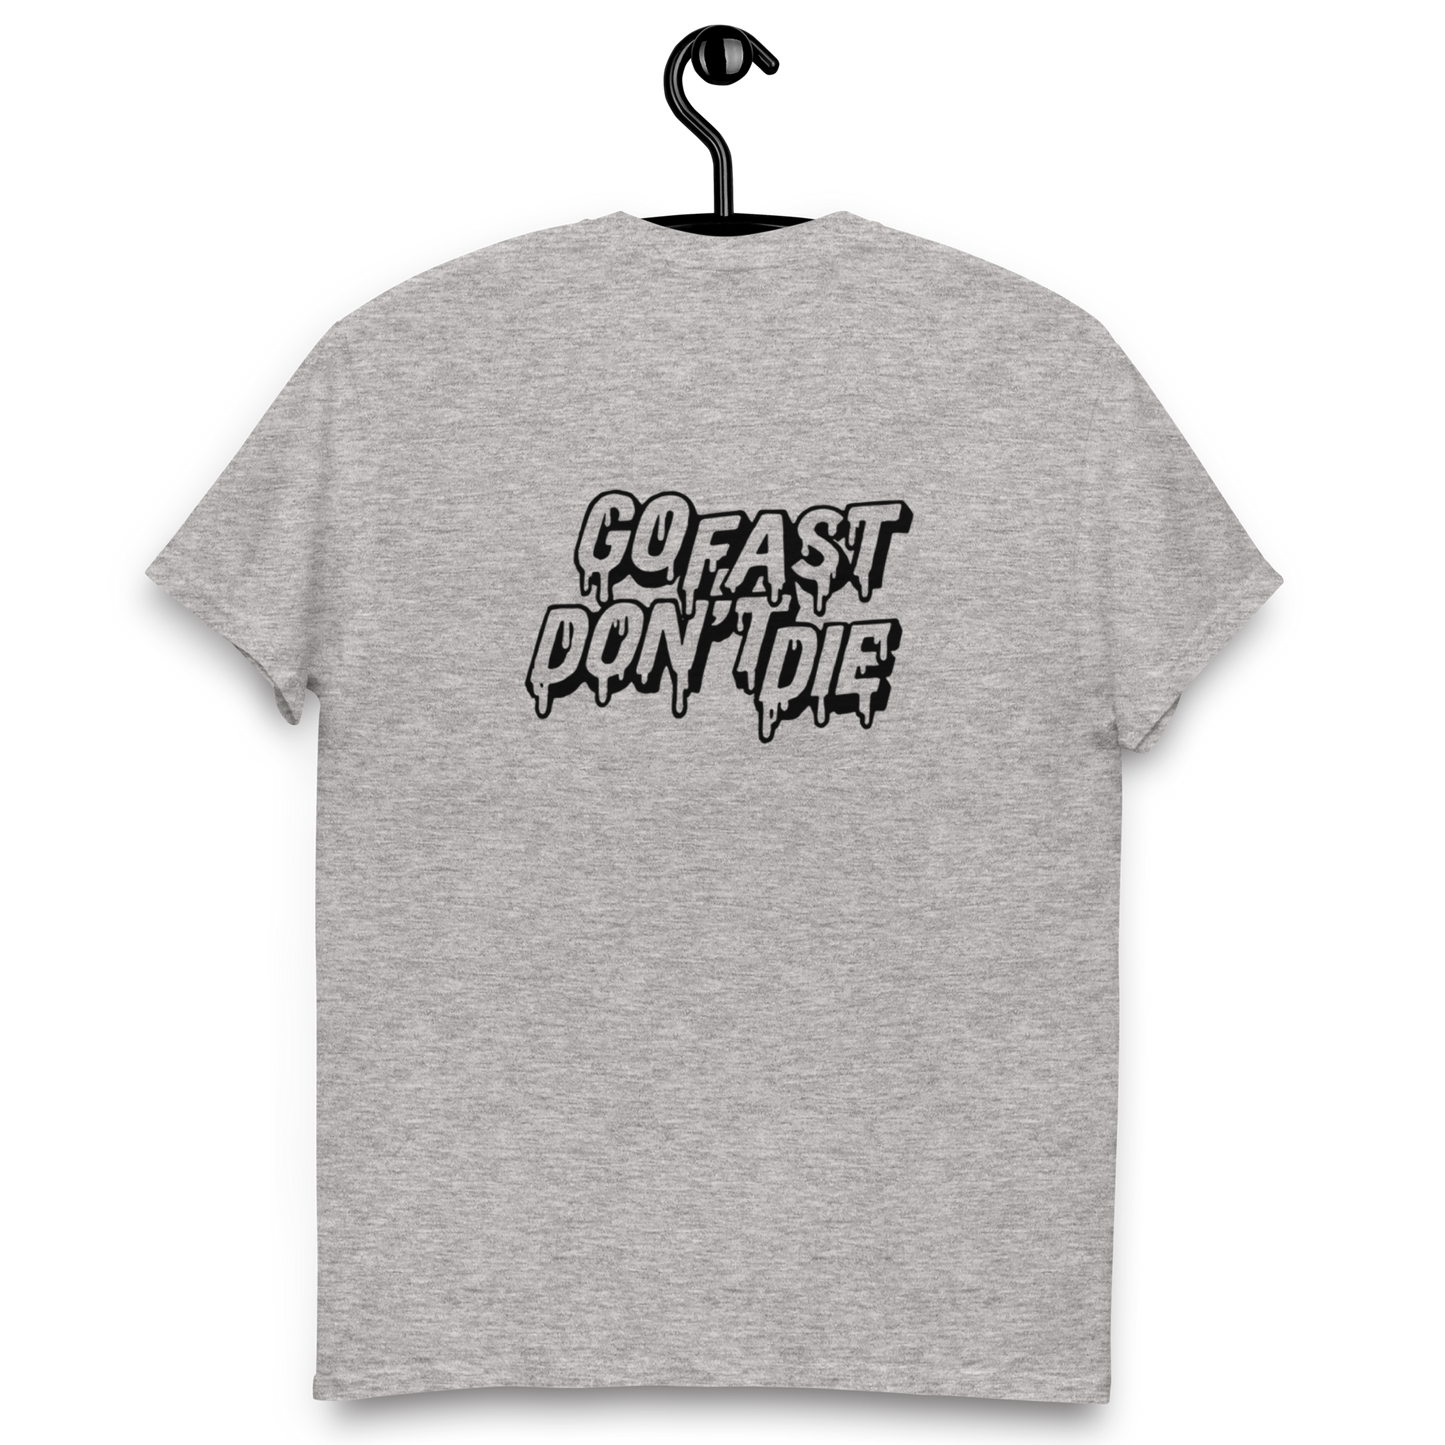 Go fast dont die t-shirt